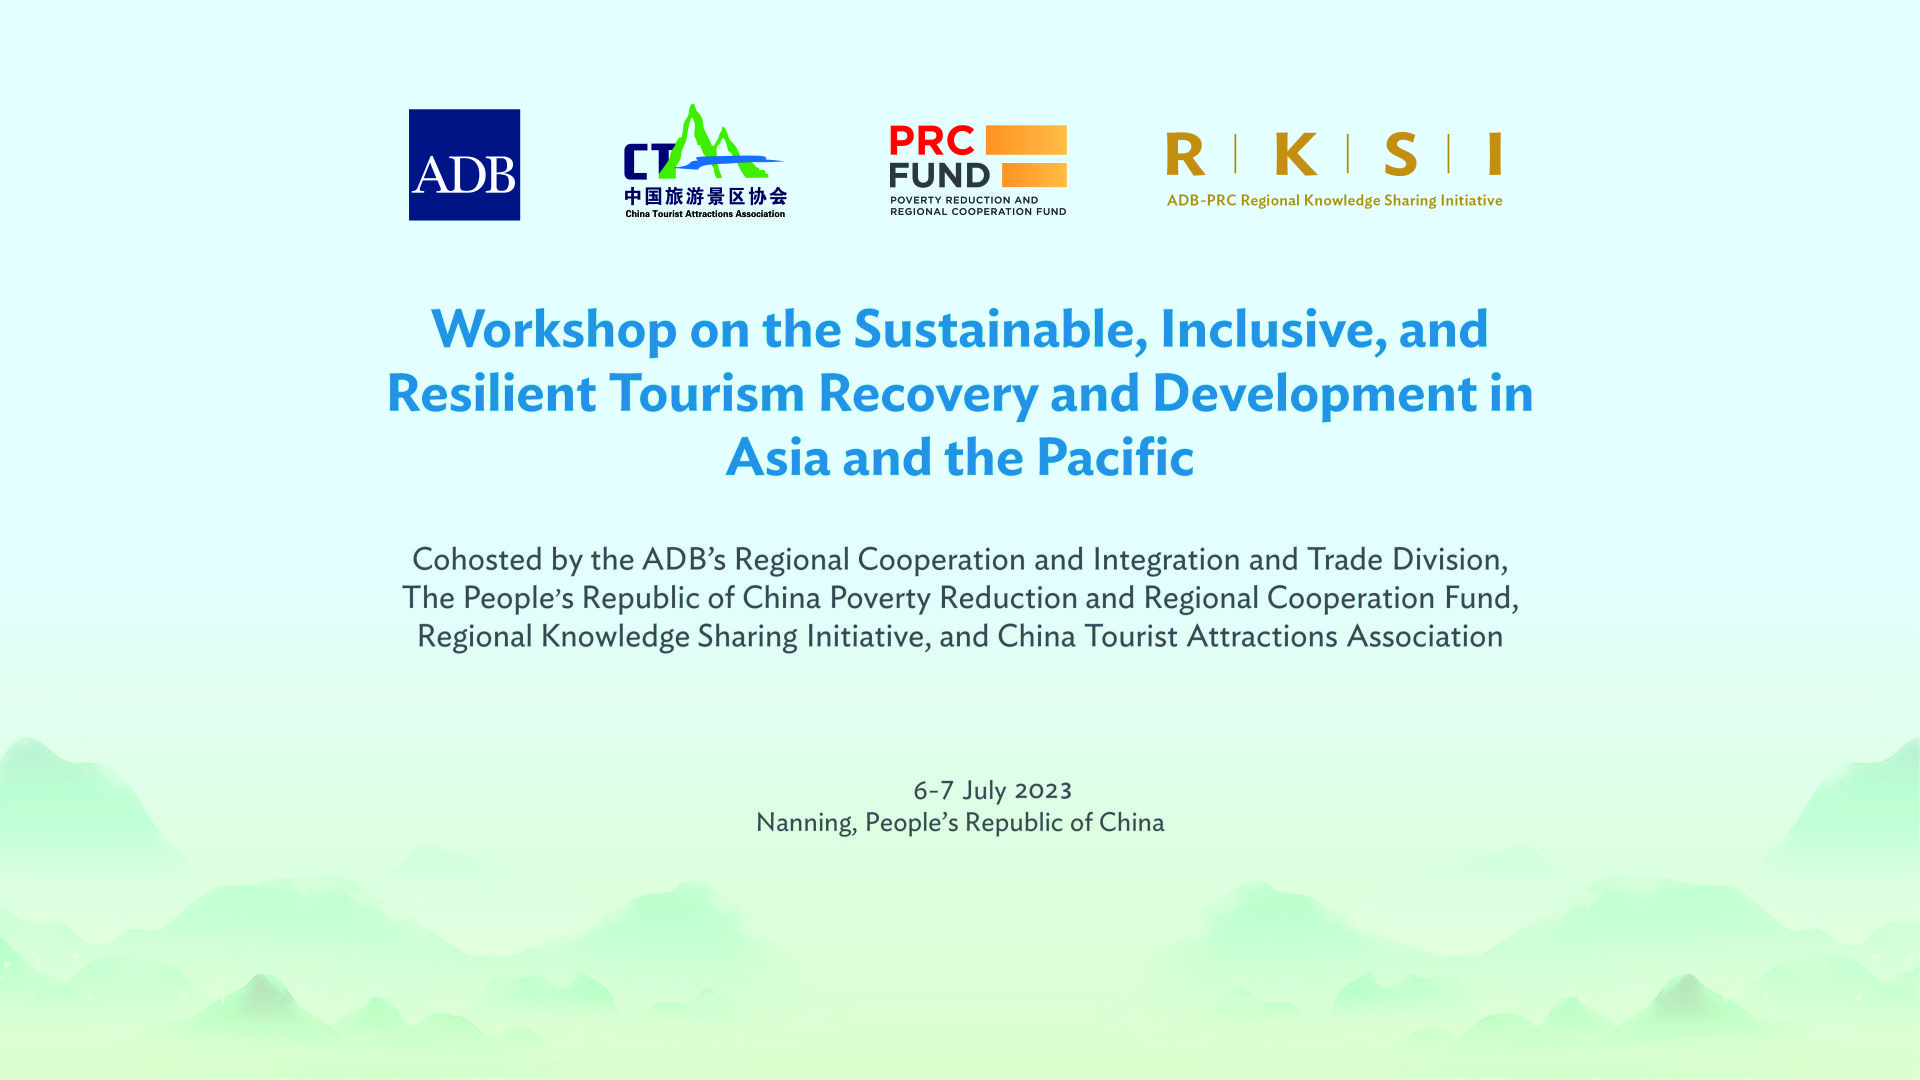 Workshop on the Sustainable, Inclusive, and Resilient Tourism Recovery and Development in Asia and the Pacific